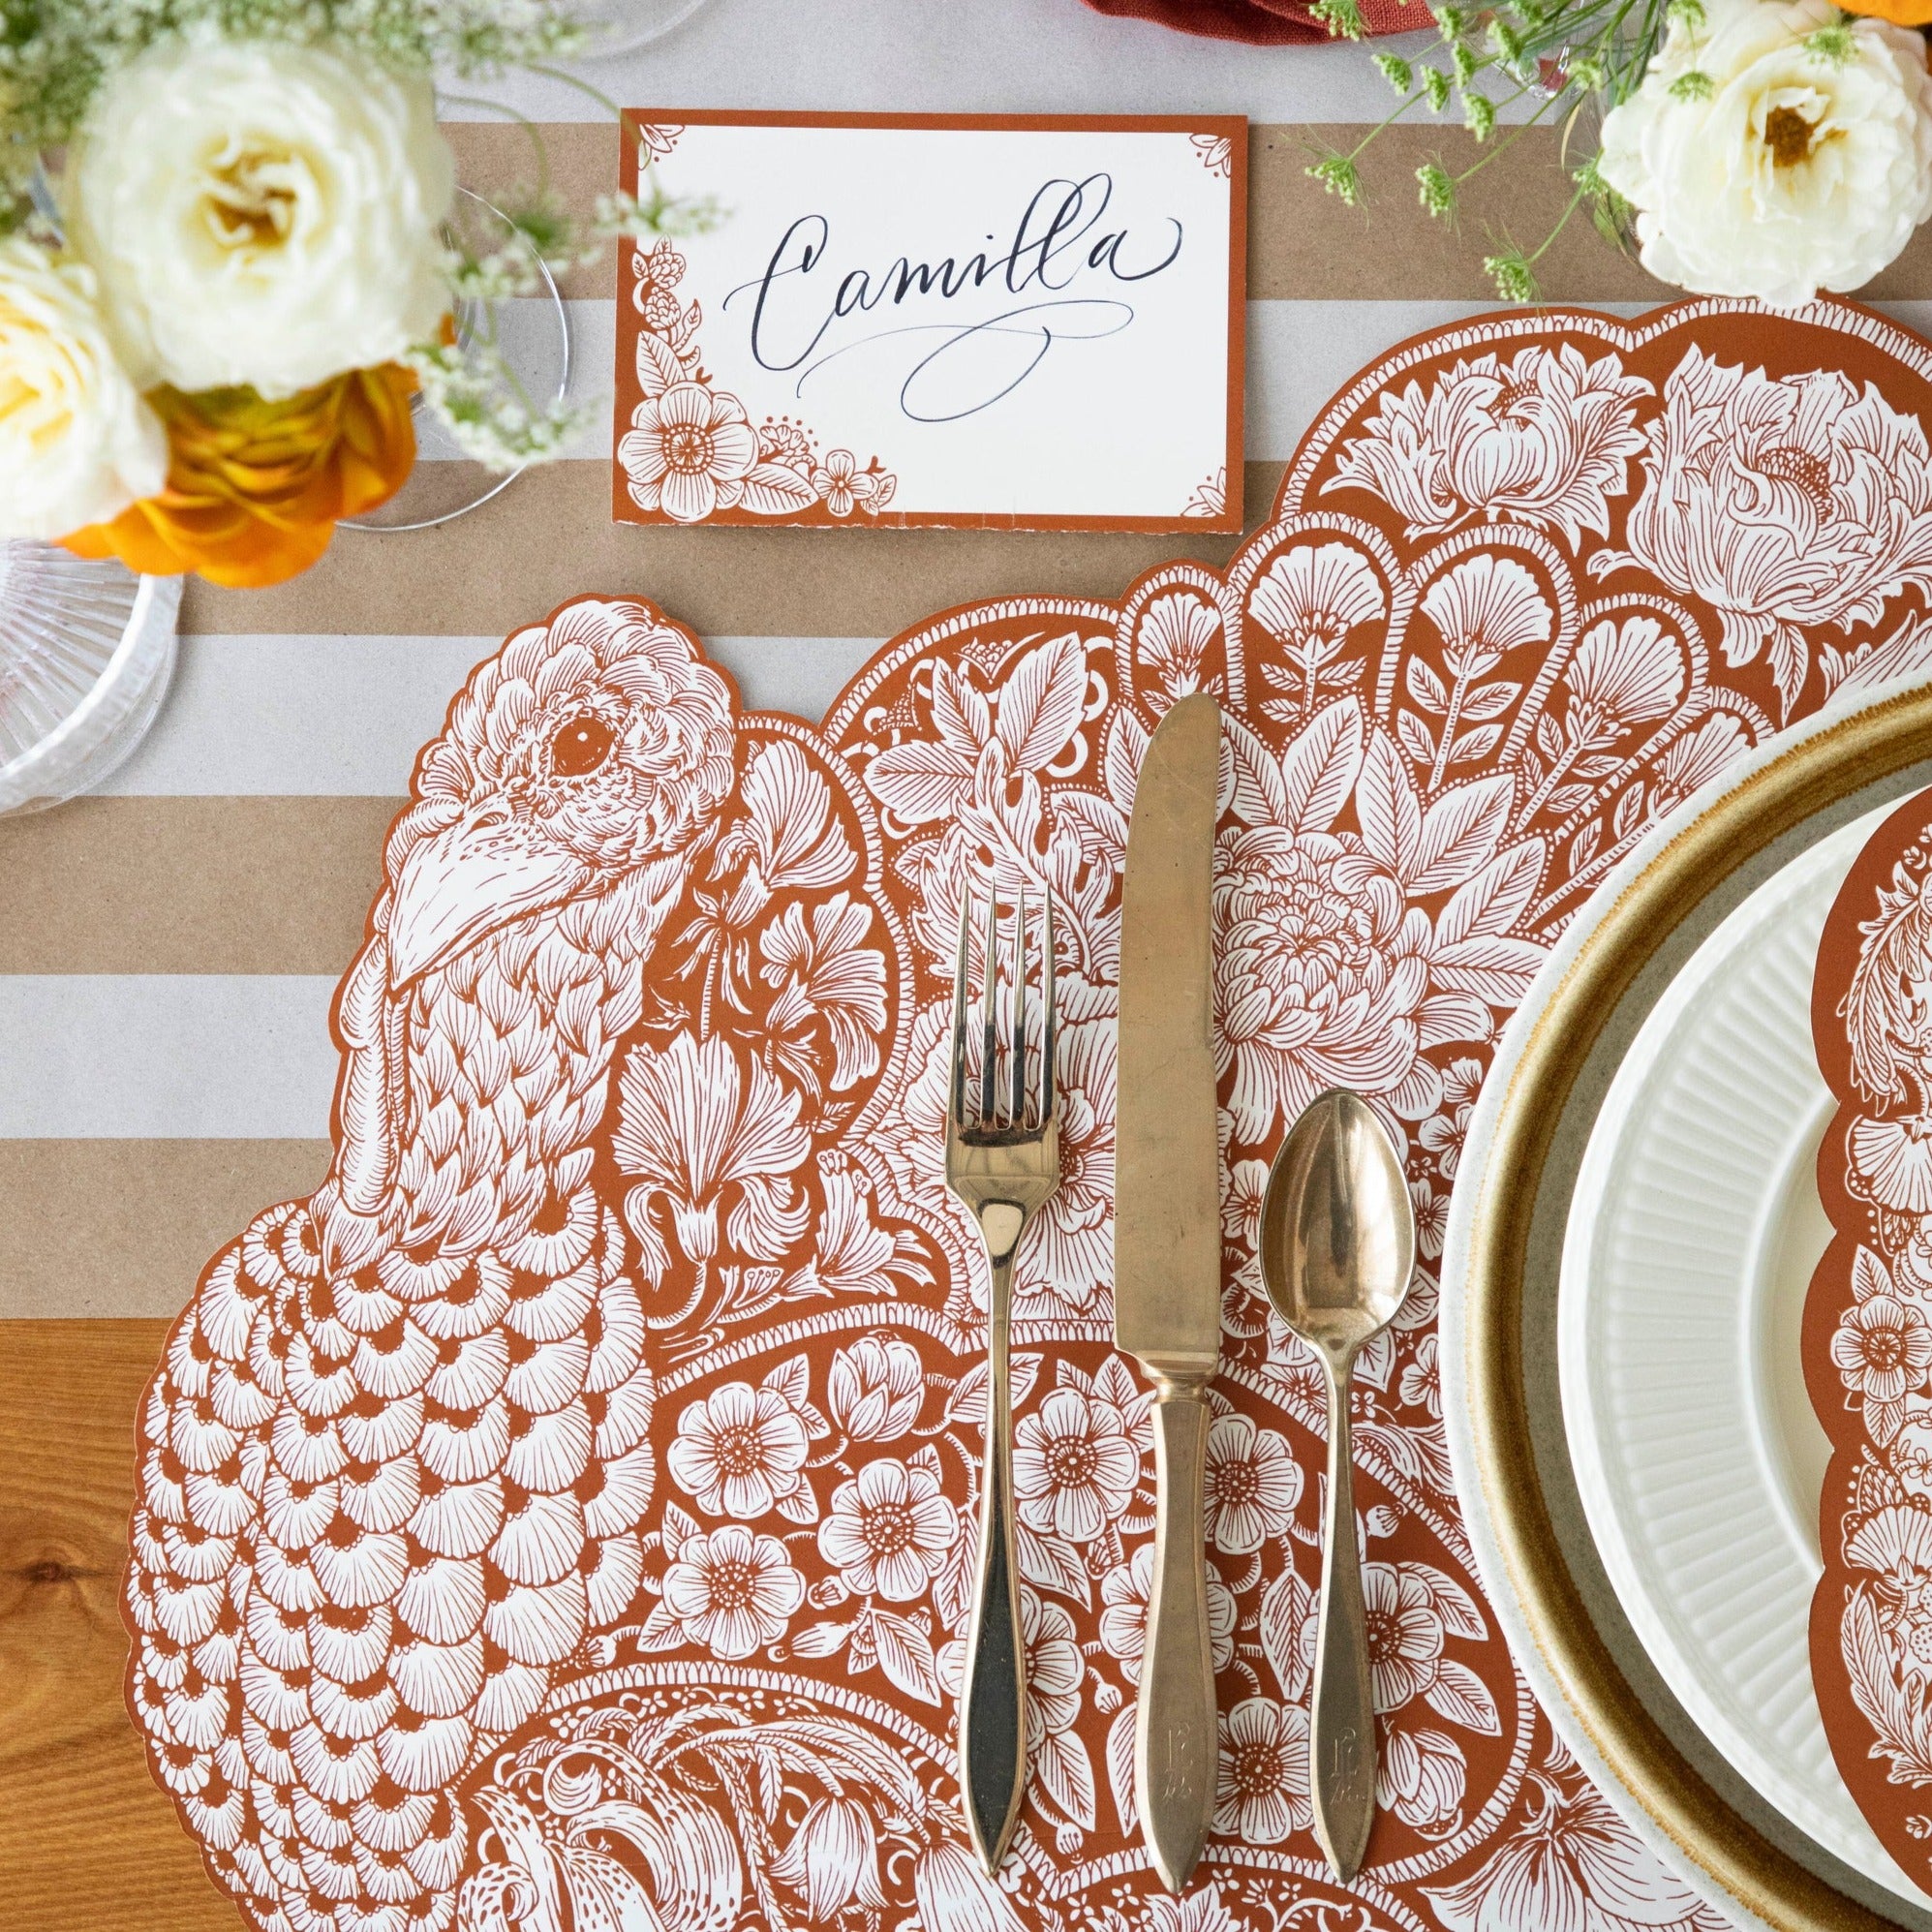 Close-up of the Die-cut Harvest Turkey Placemat under an elegant Thanksgiving place setting, showing the detailed artwork.